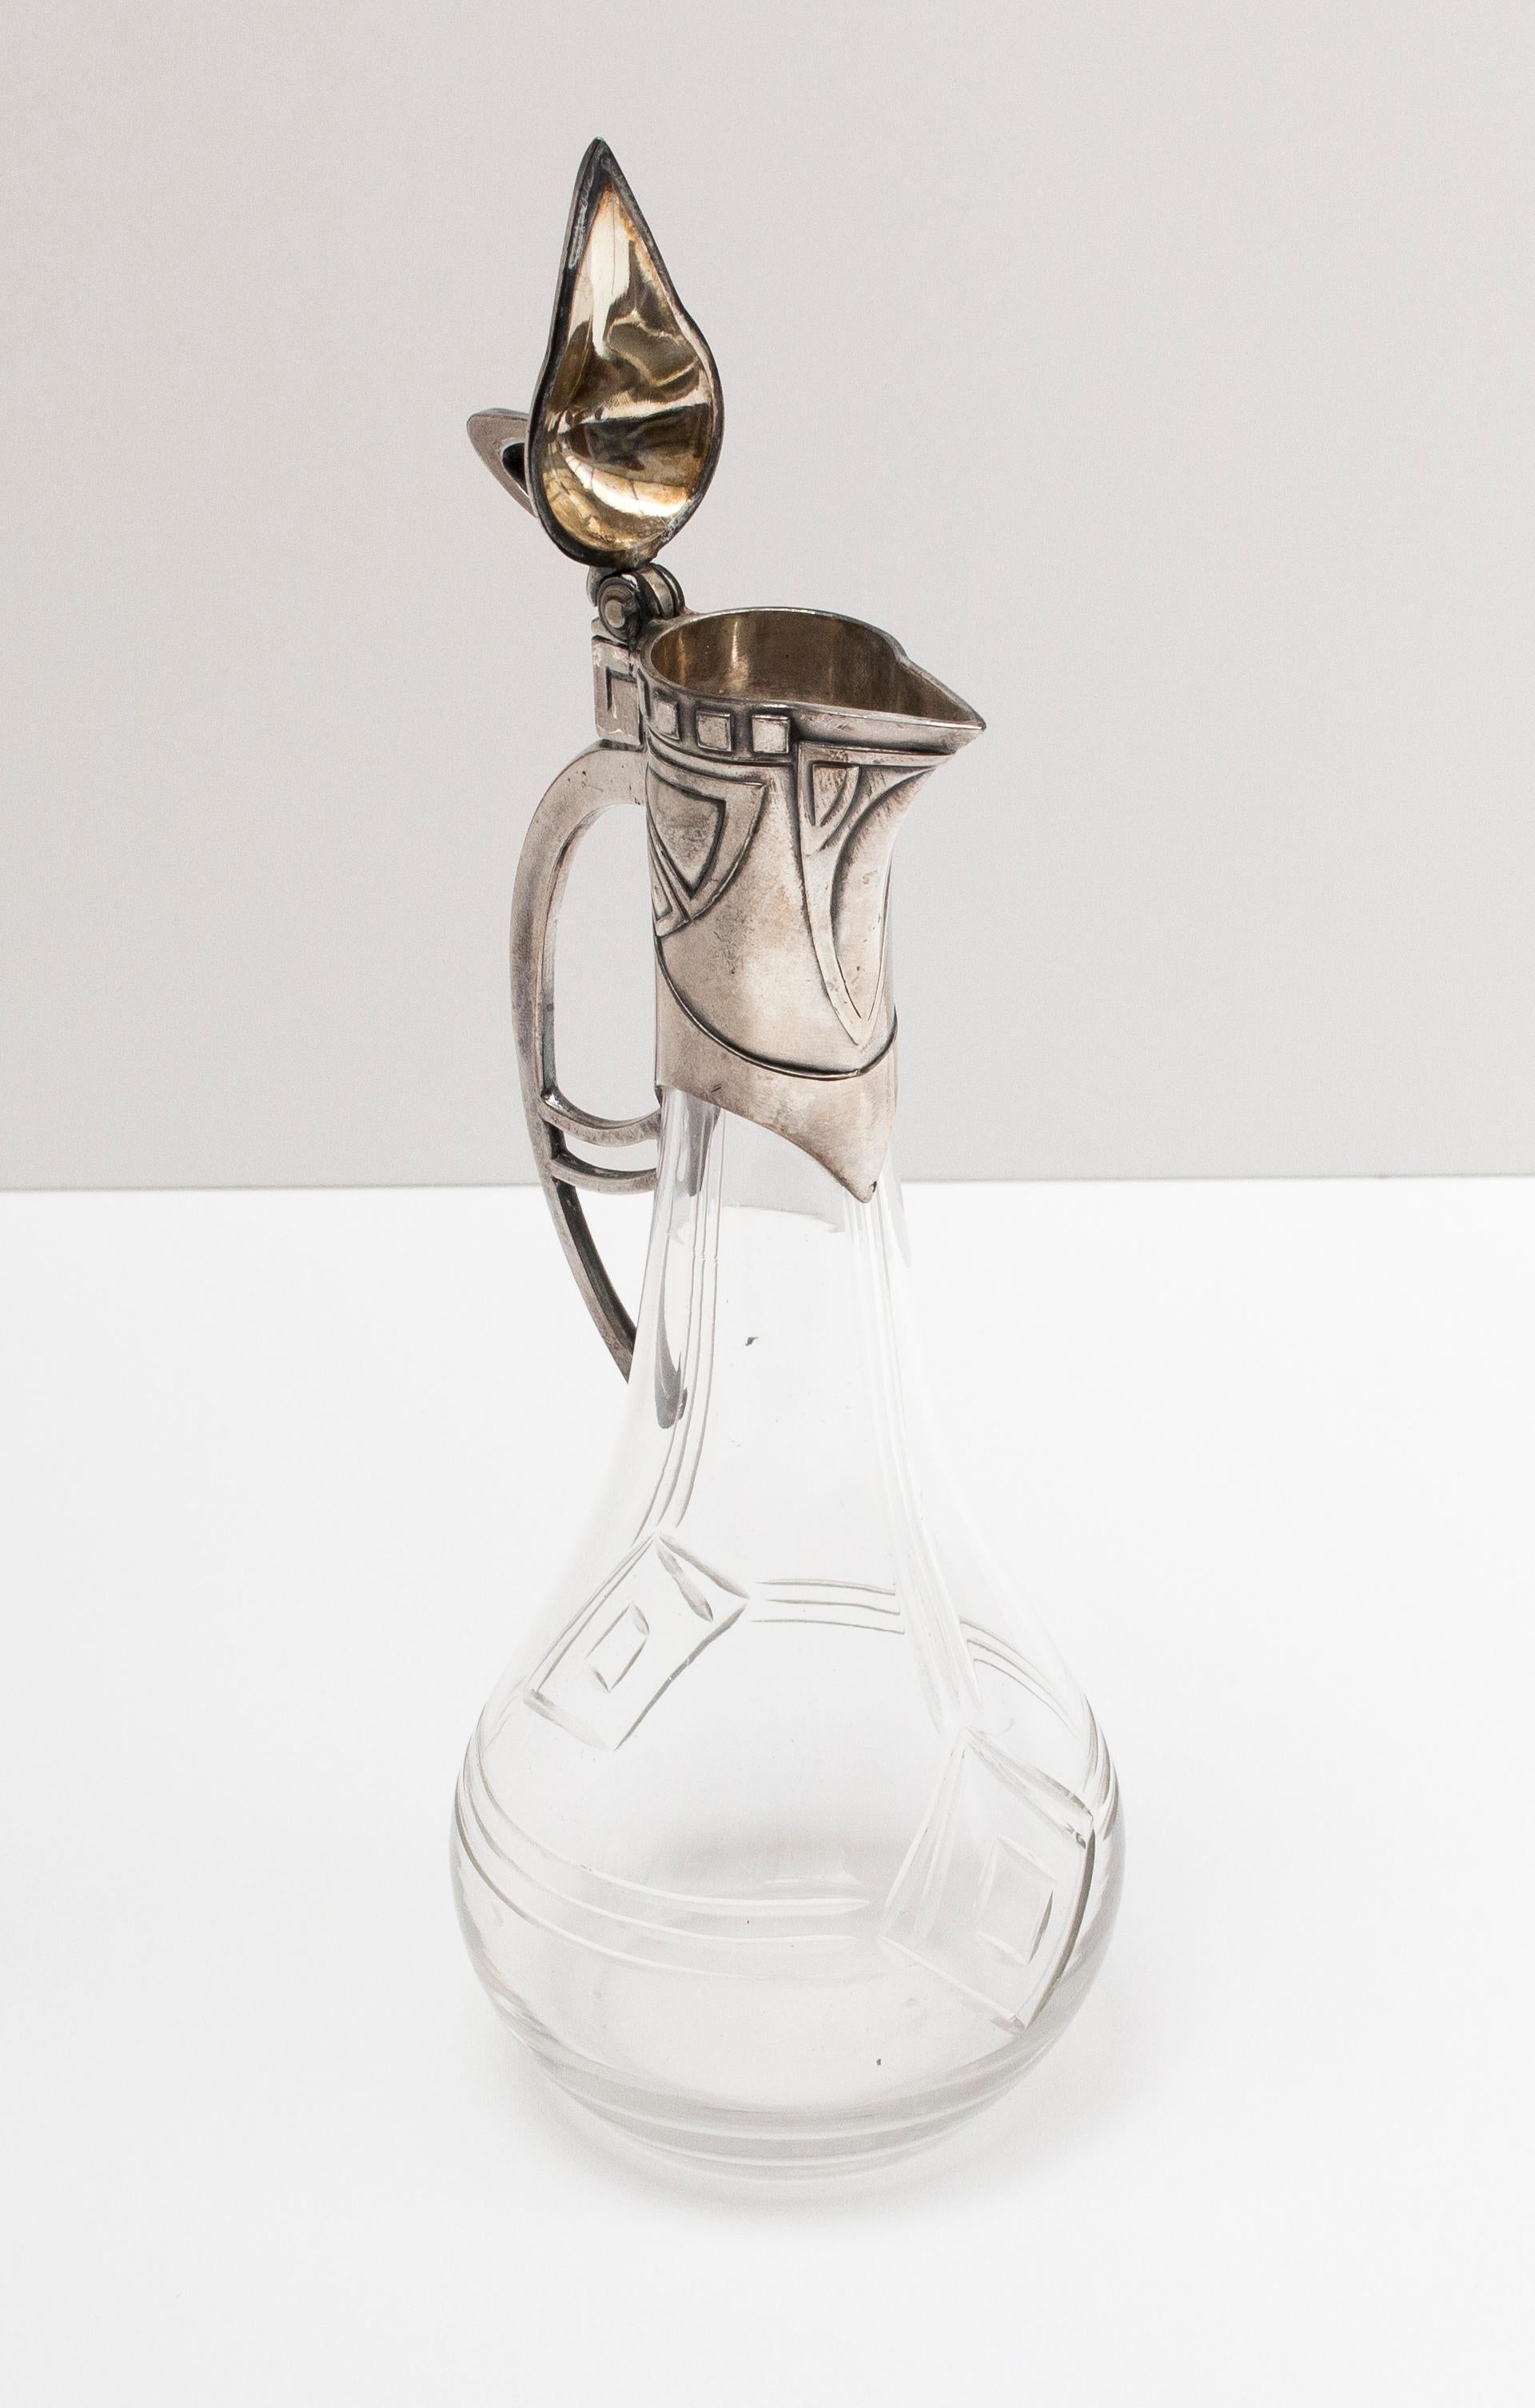 Beautiful little WMF pitcher from the Art Nouveau period with beautiful patina and original glass.